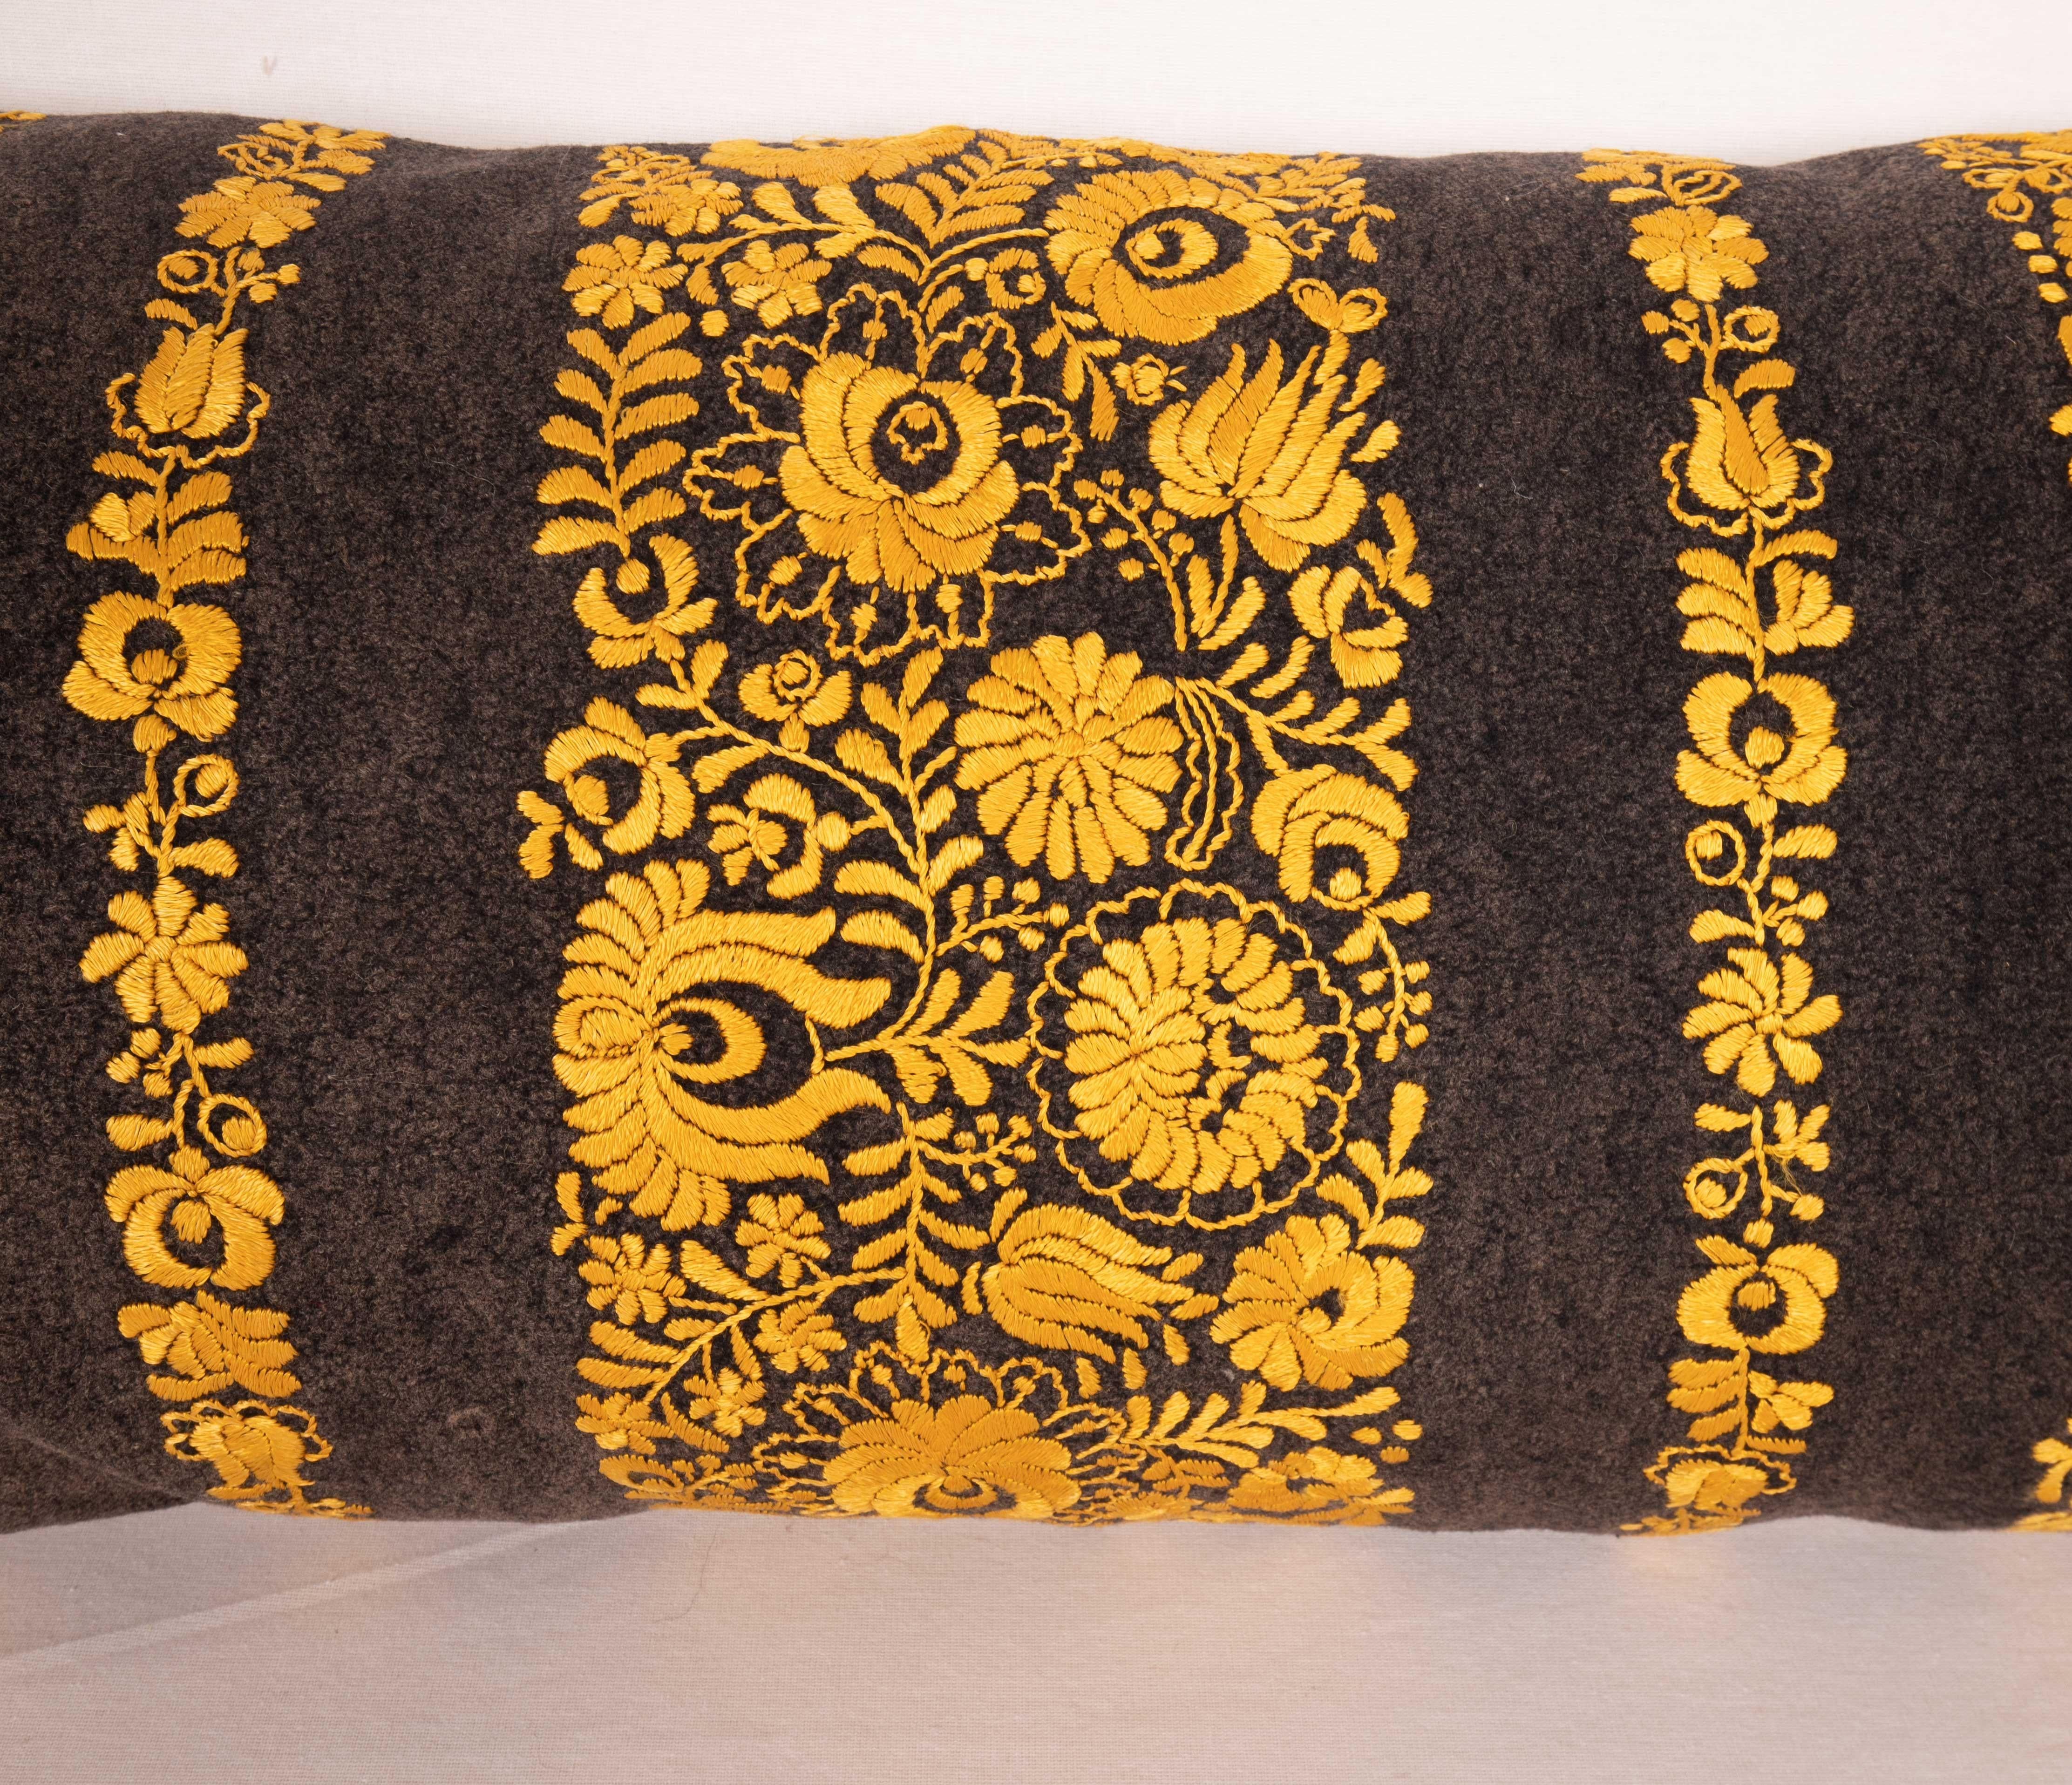 Embroidered Hungarian Matyo Pillow Case, Early 20th C. For Sale